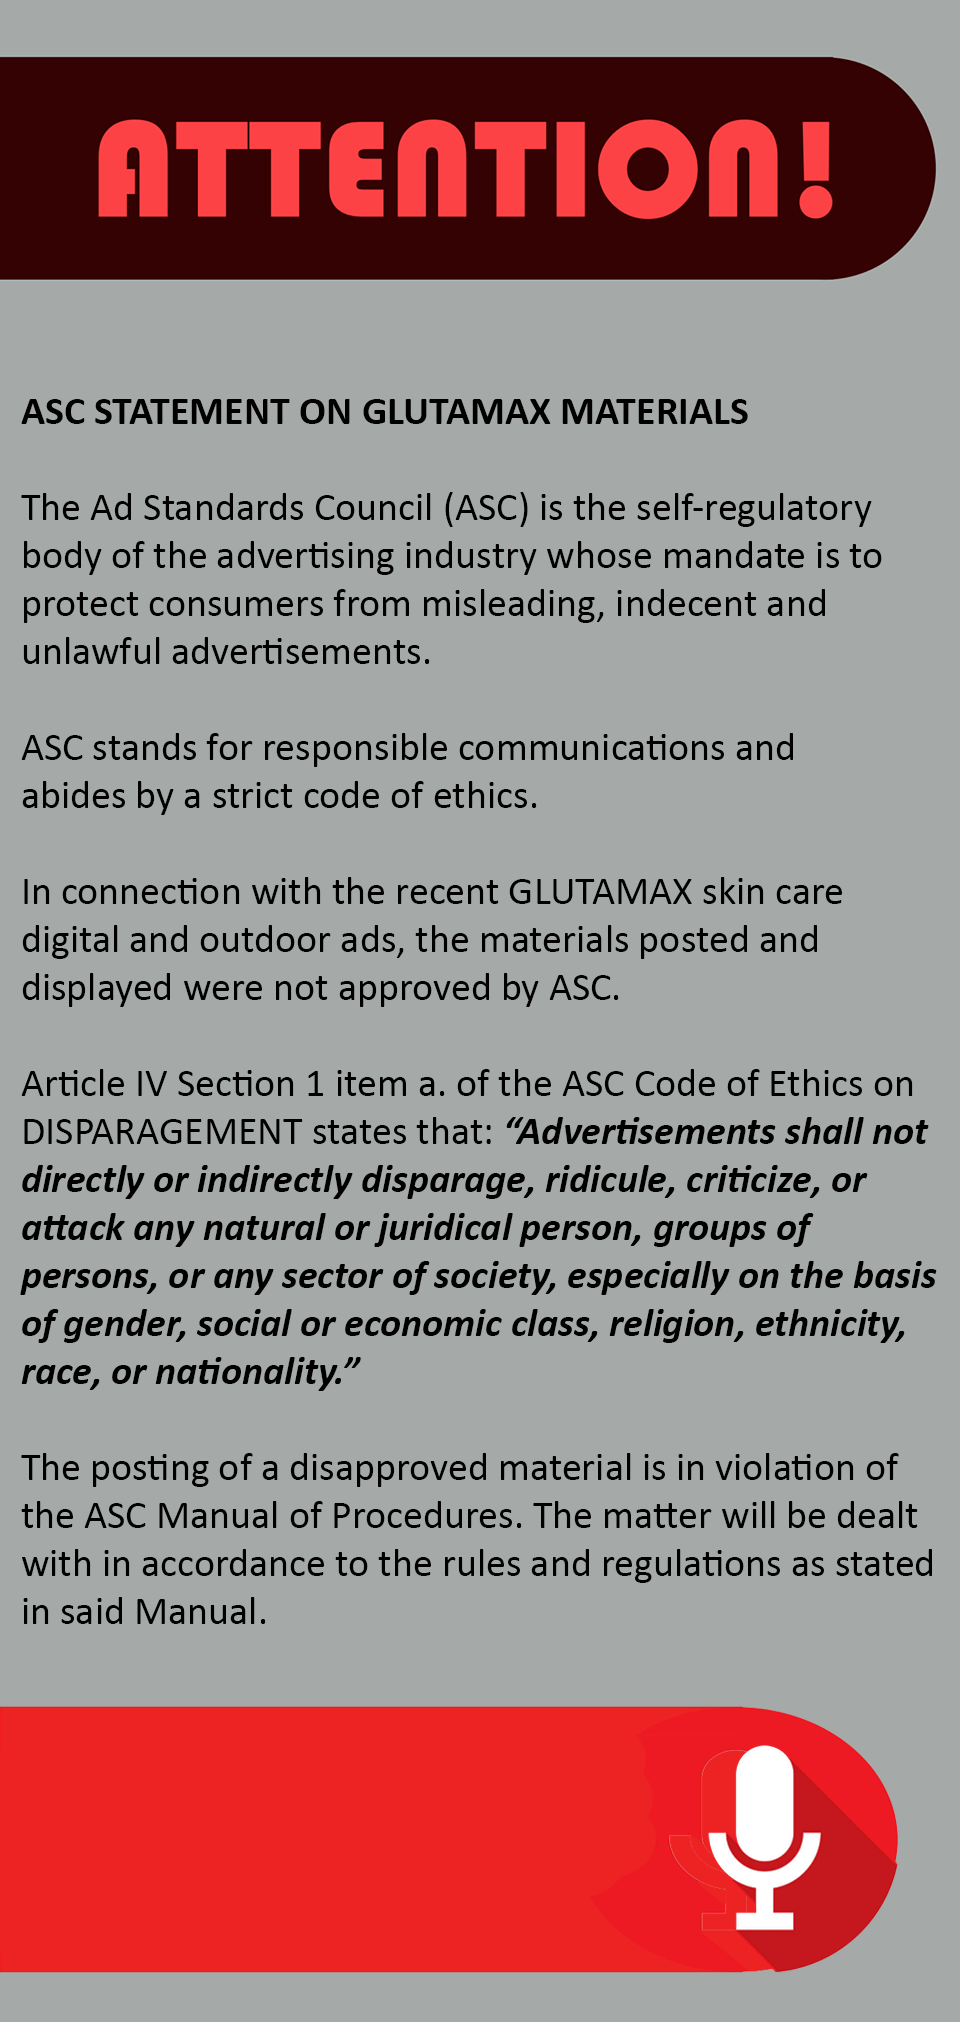 The Ad Standards Council's statement. Photo: ASC's FB page.